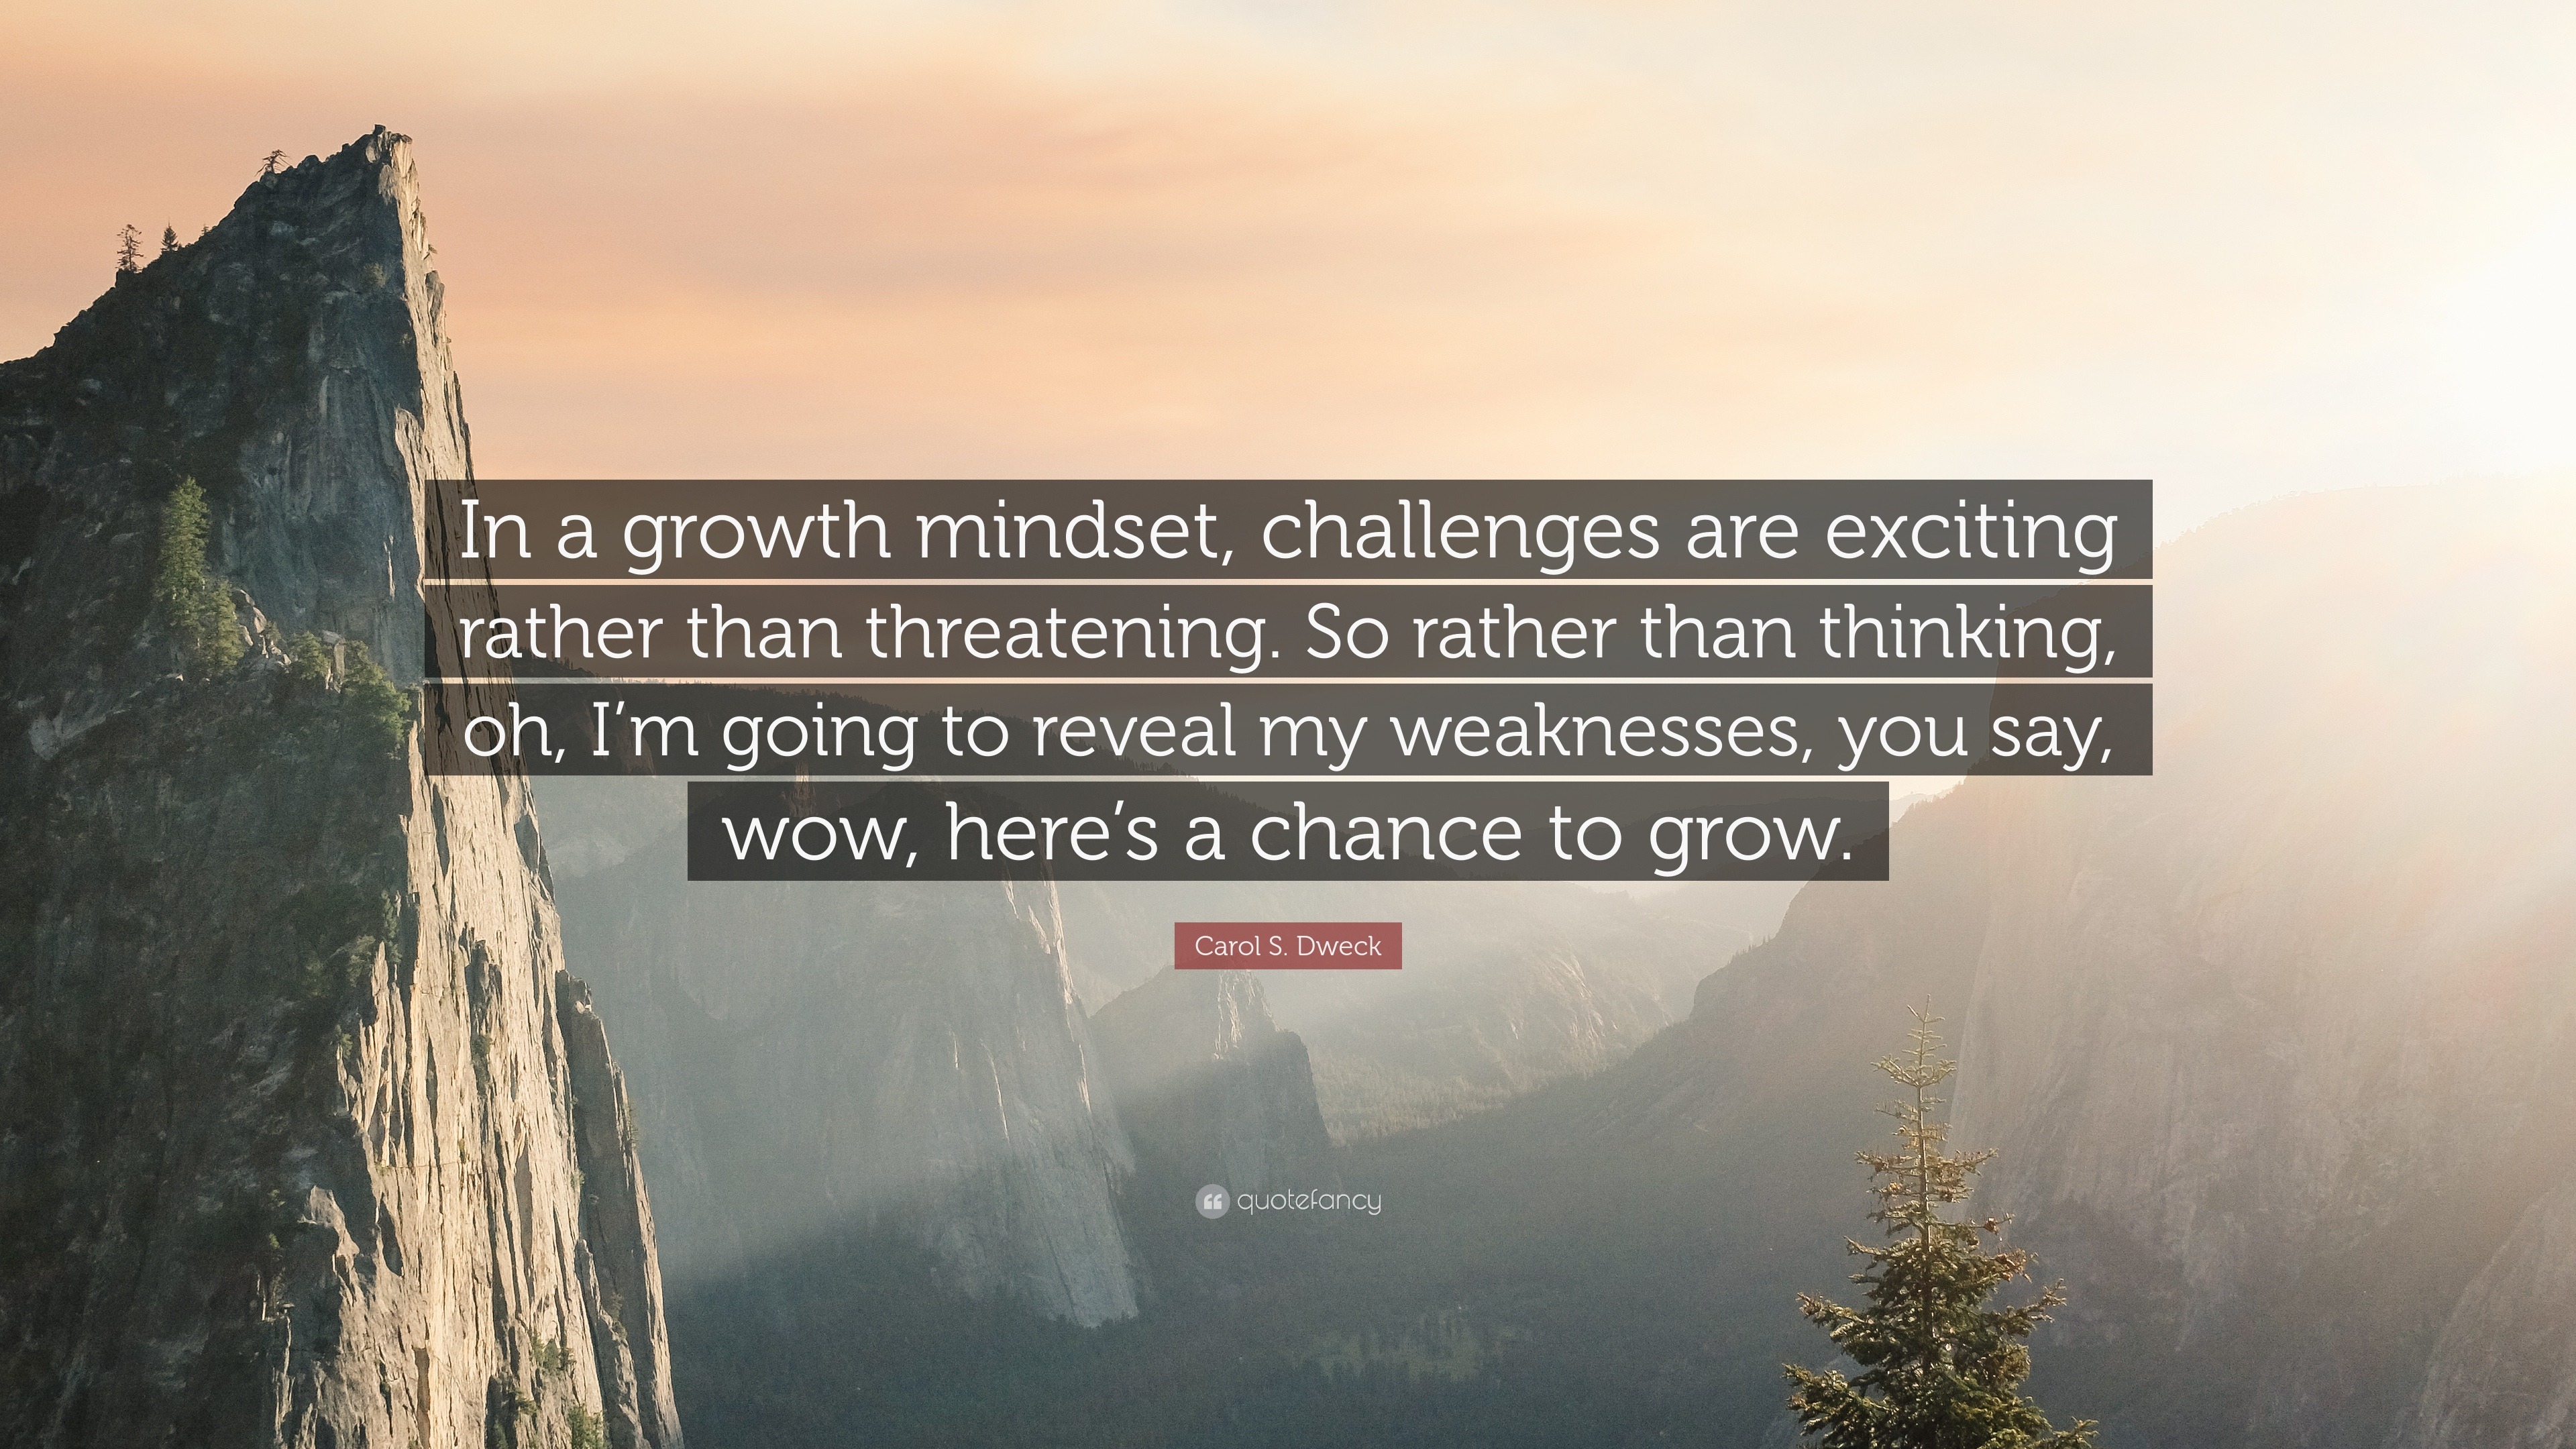 Carol S. Dweck Quote: “In a growth mindset, challenges are exciting